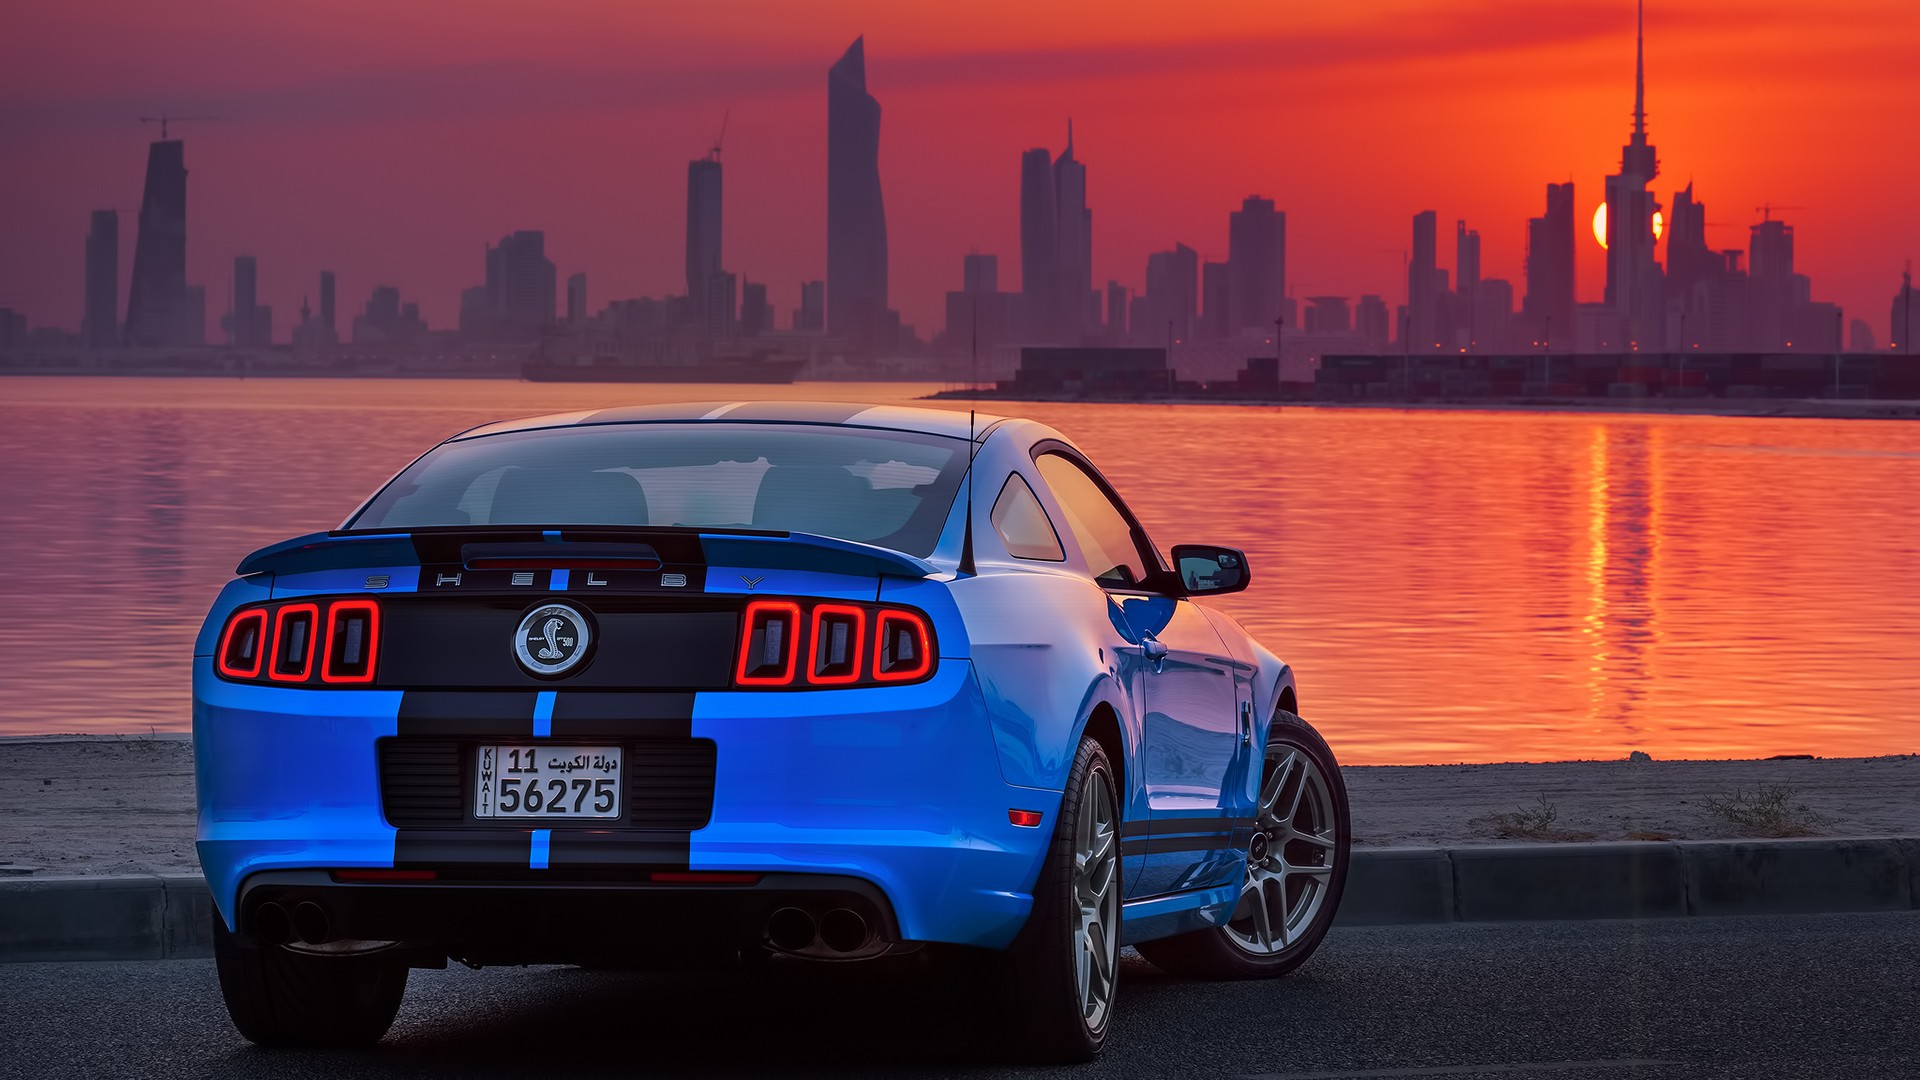 Shelby GT500, Ford USA, Car, Ford Mustang Shelby, Sunrise, Kuwait, Blue Cars Wallpaper